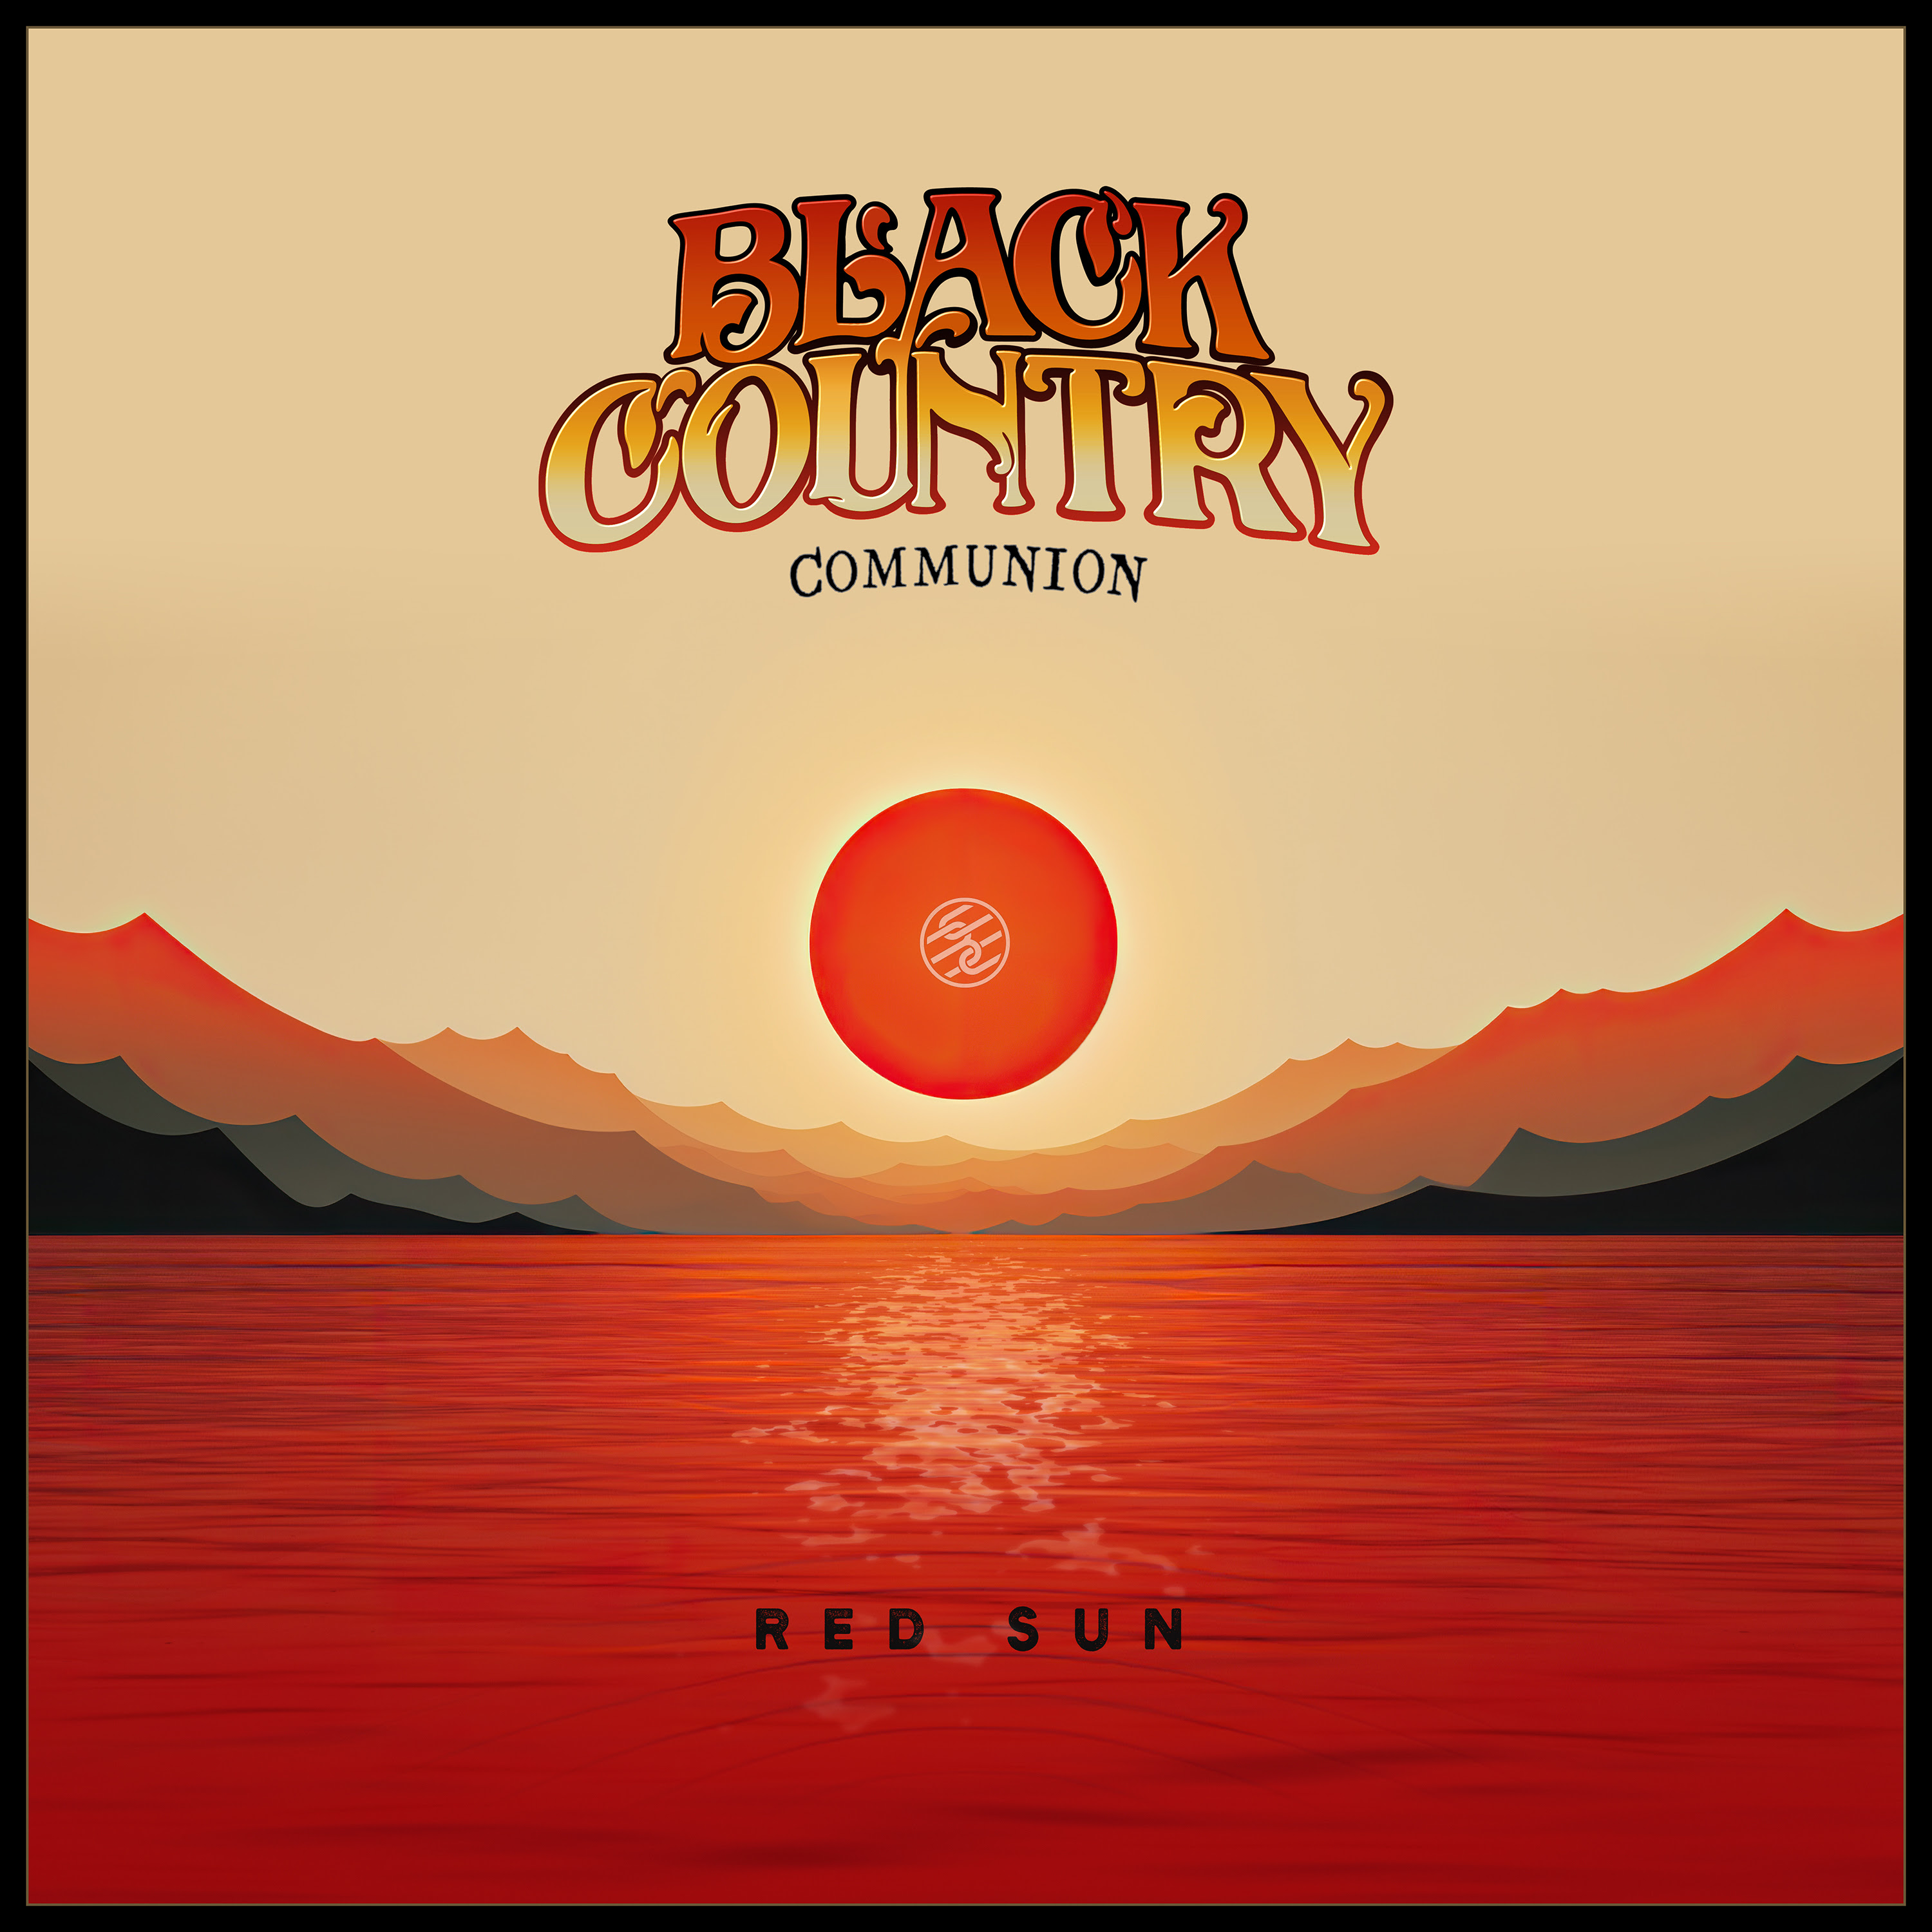 Supergroup Black Country Communion Releases Second Single "Red Sun"